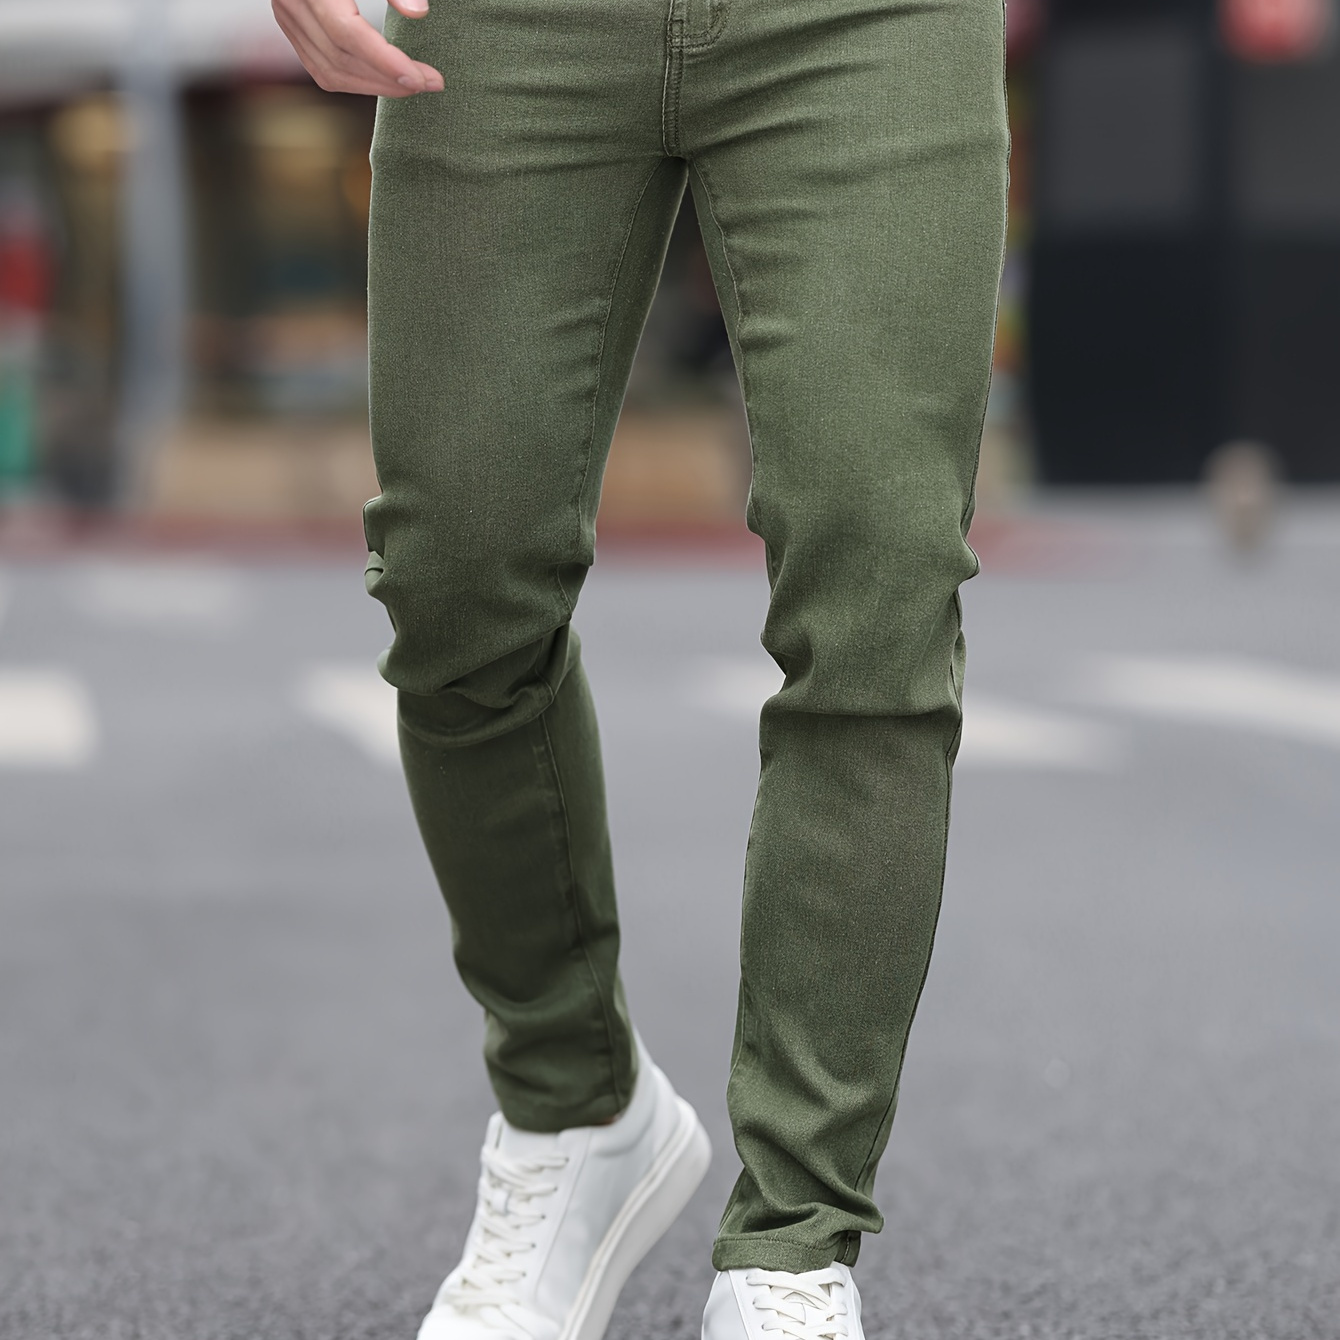 

Men's Trendy Solid Slim Fit Jeans, Chic Street Style Slim Fit Bottoms For Men, All Seasons